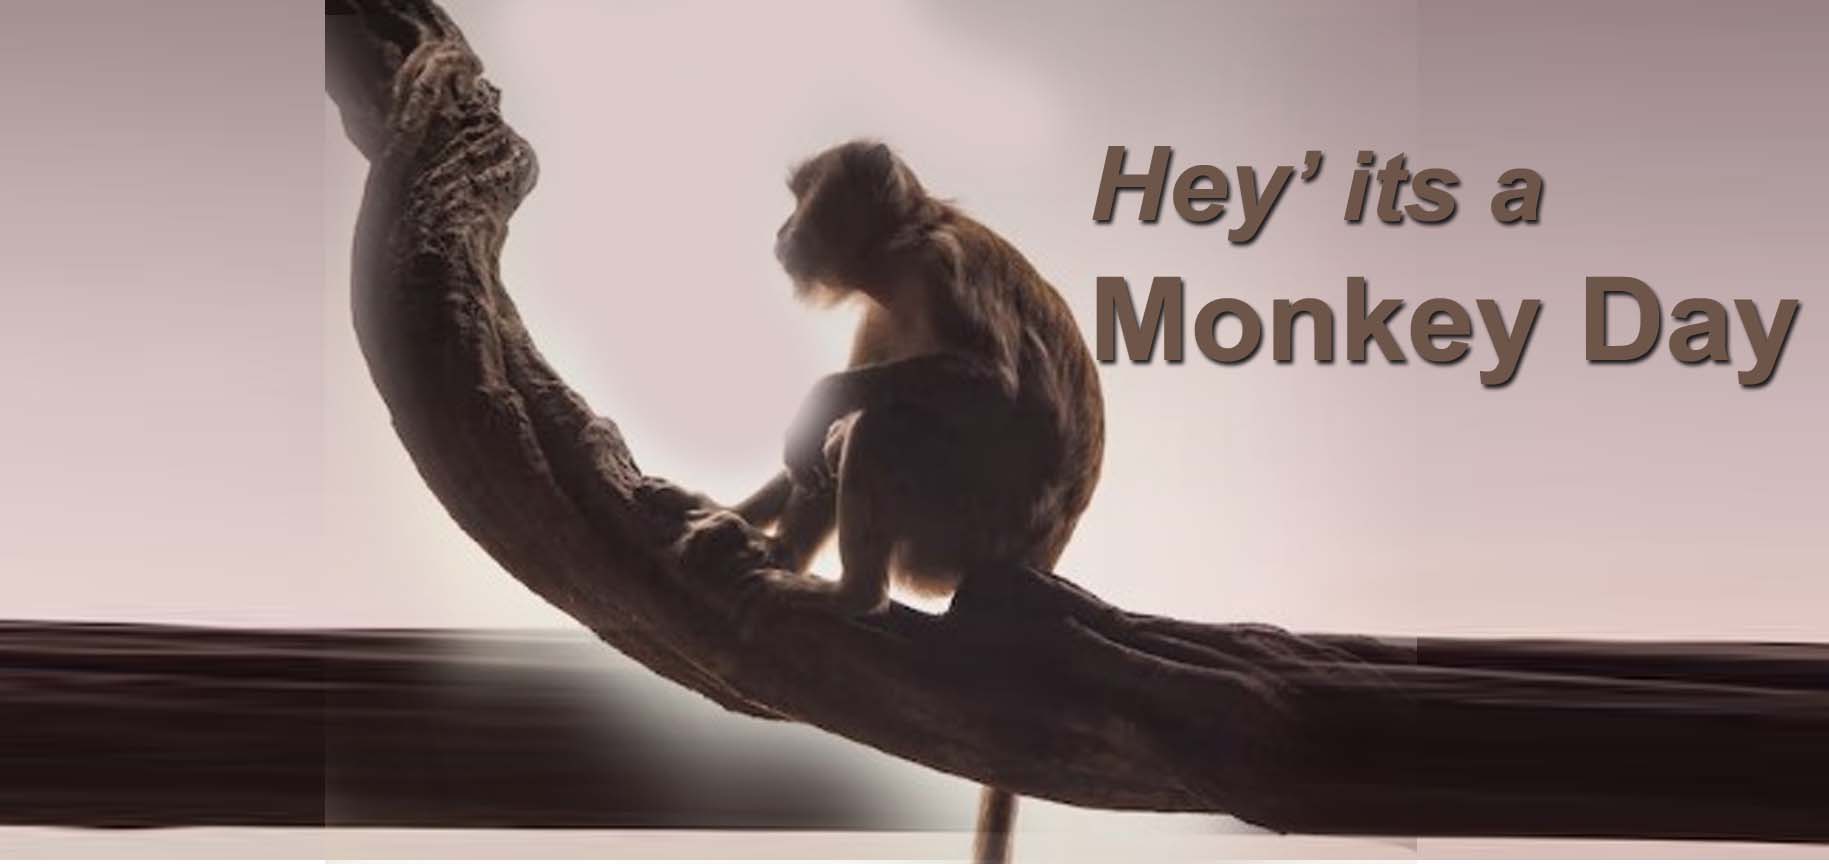 Monkeys also have days,International Monkey Day:بندروں  کے بھی دن آتے ہیں